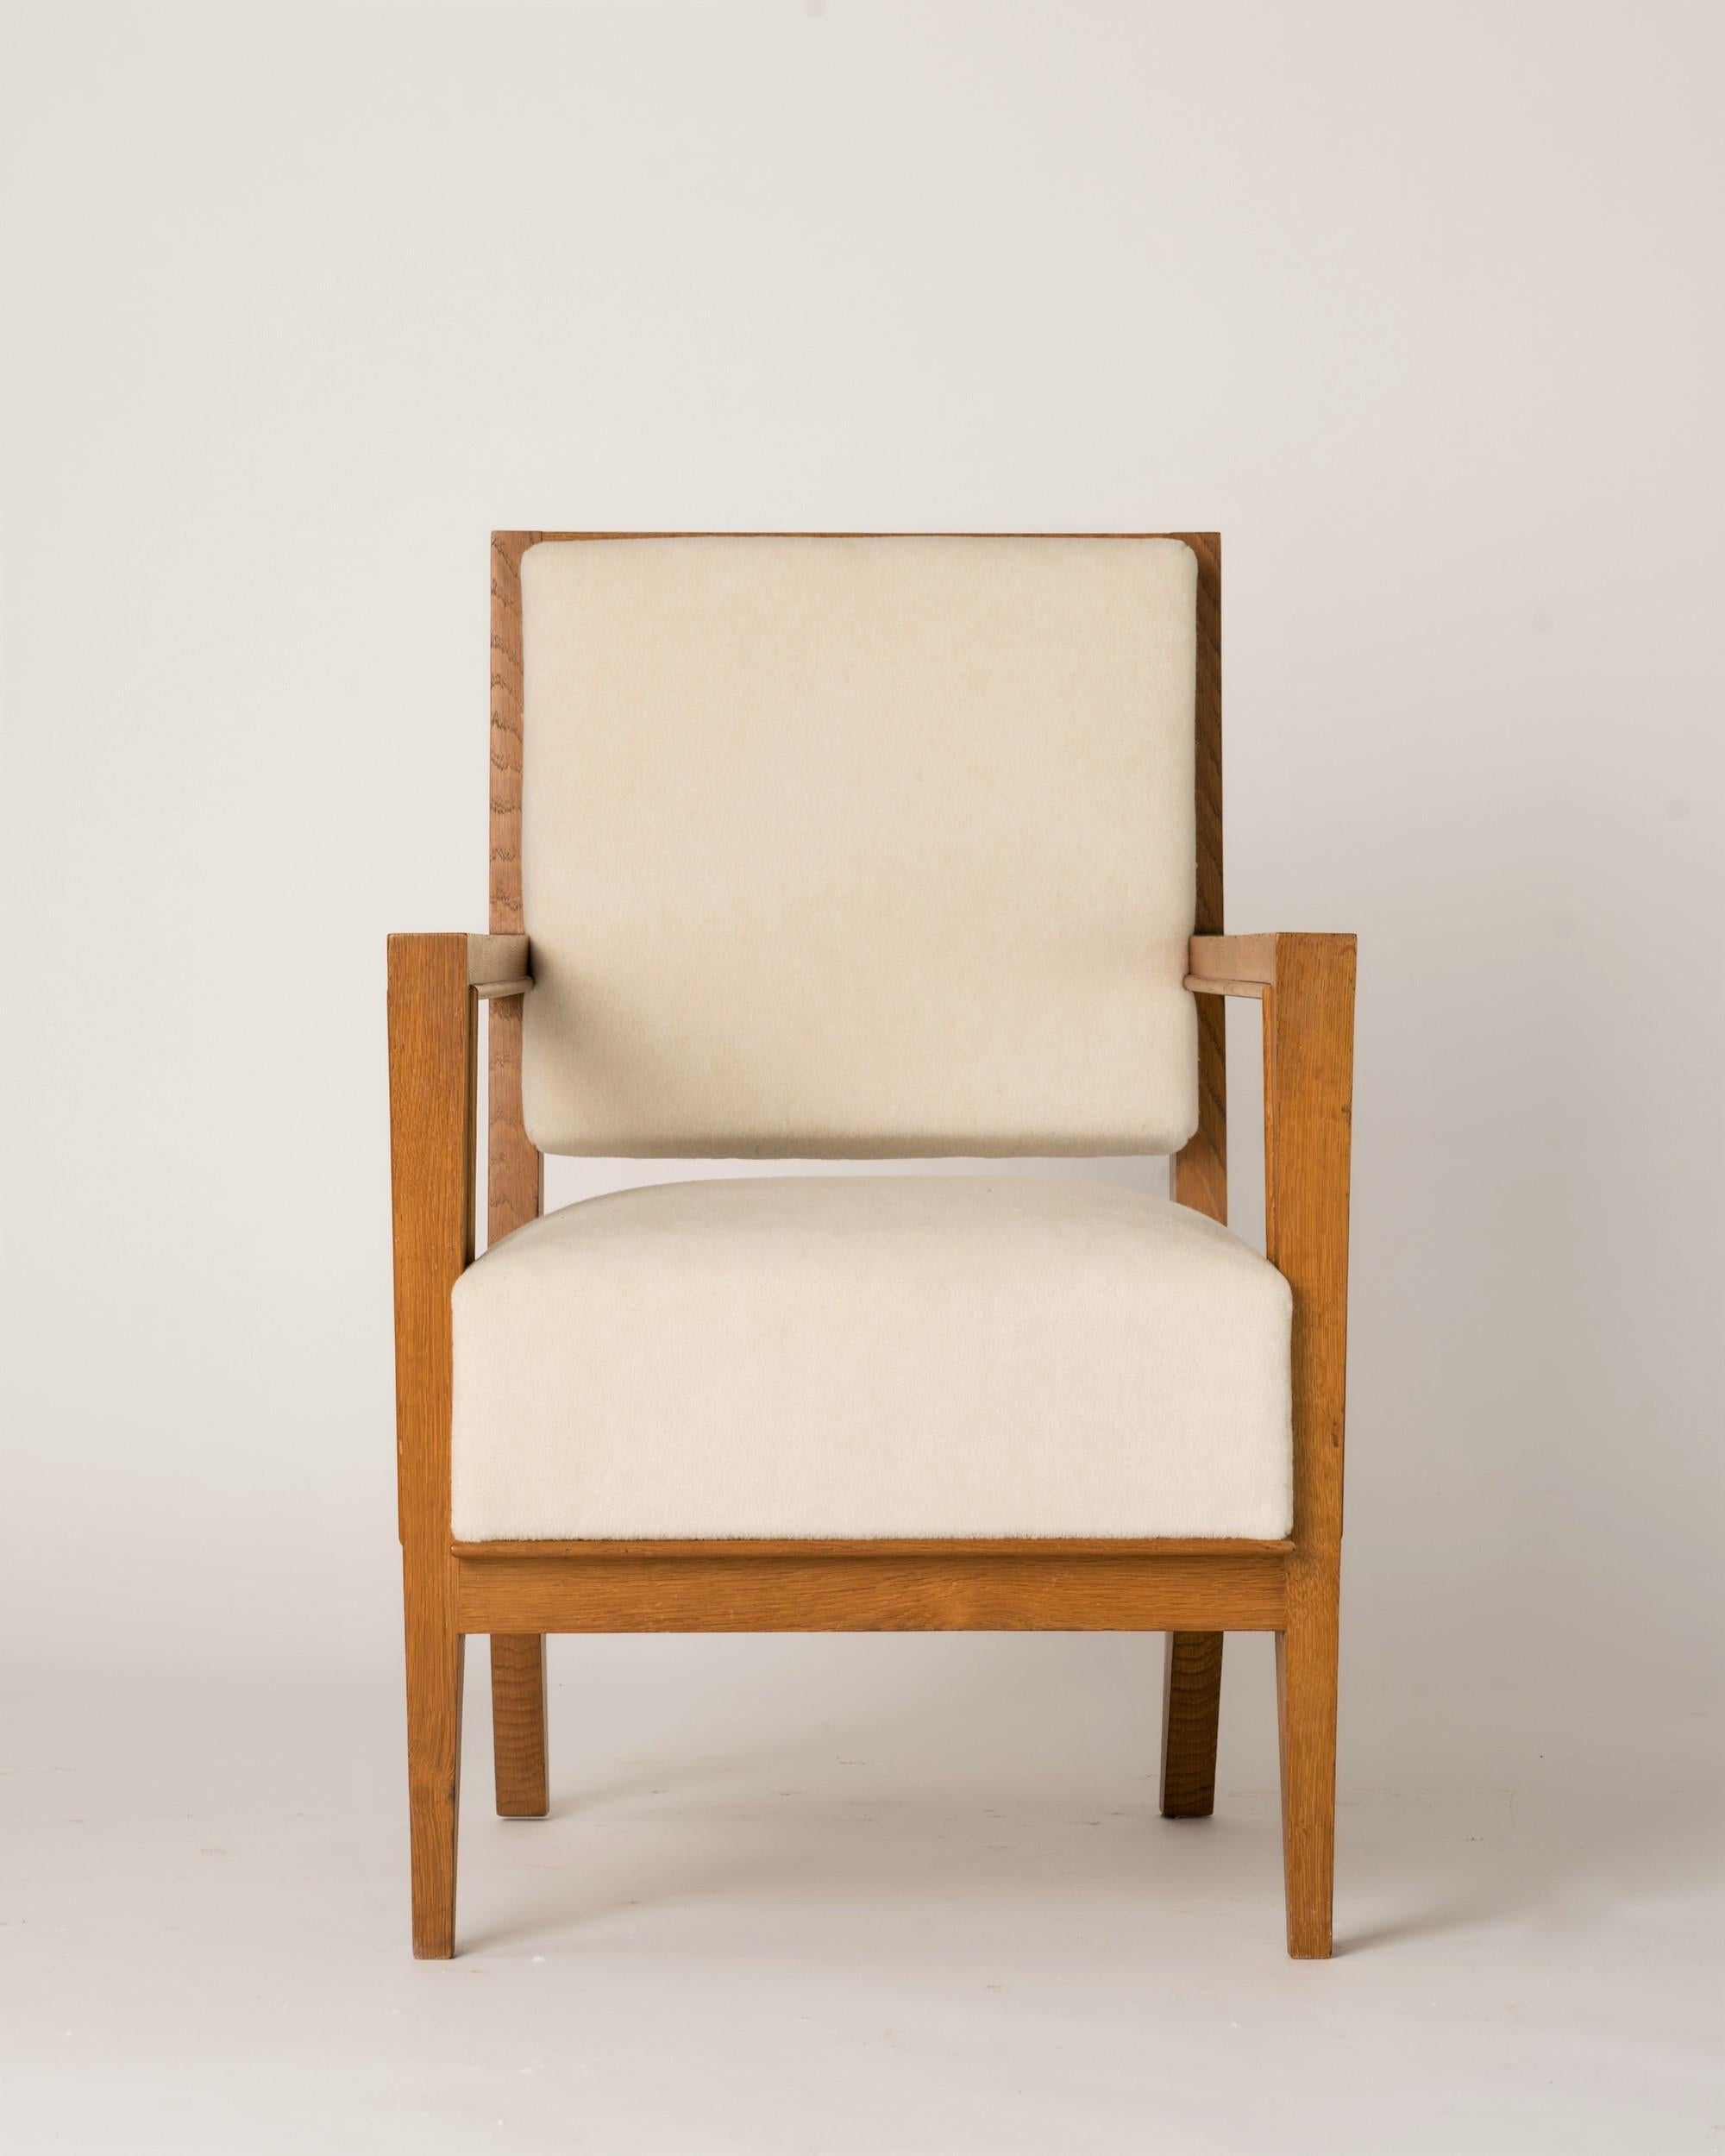 French Minimalist Solid Oak Armchair Creme Pierre Frey Mohair, France 1940's For Sale